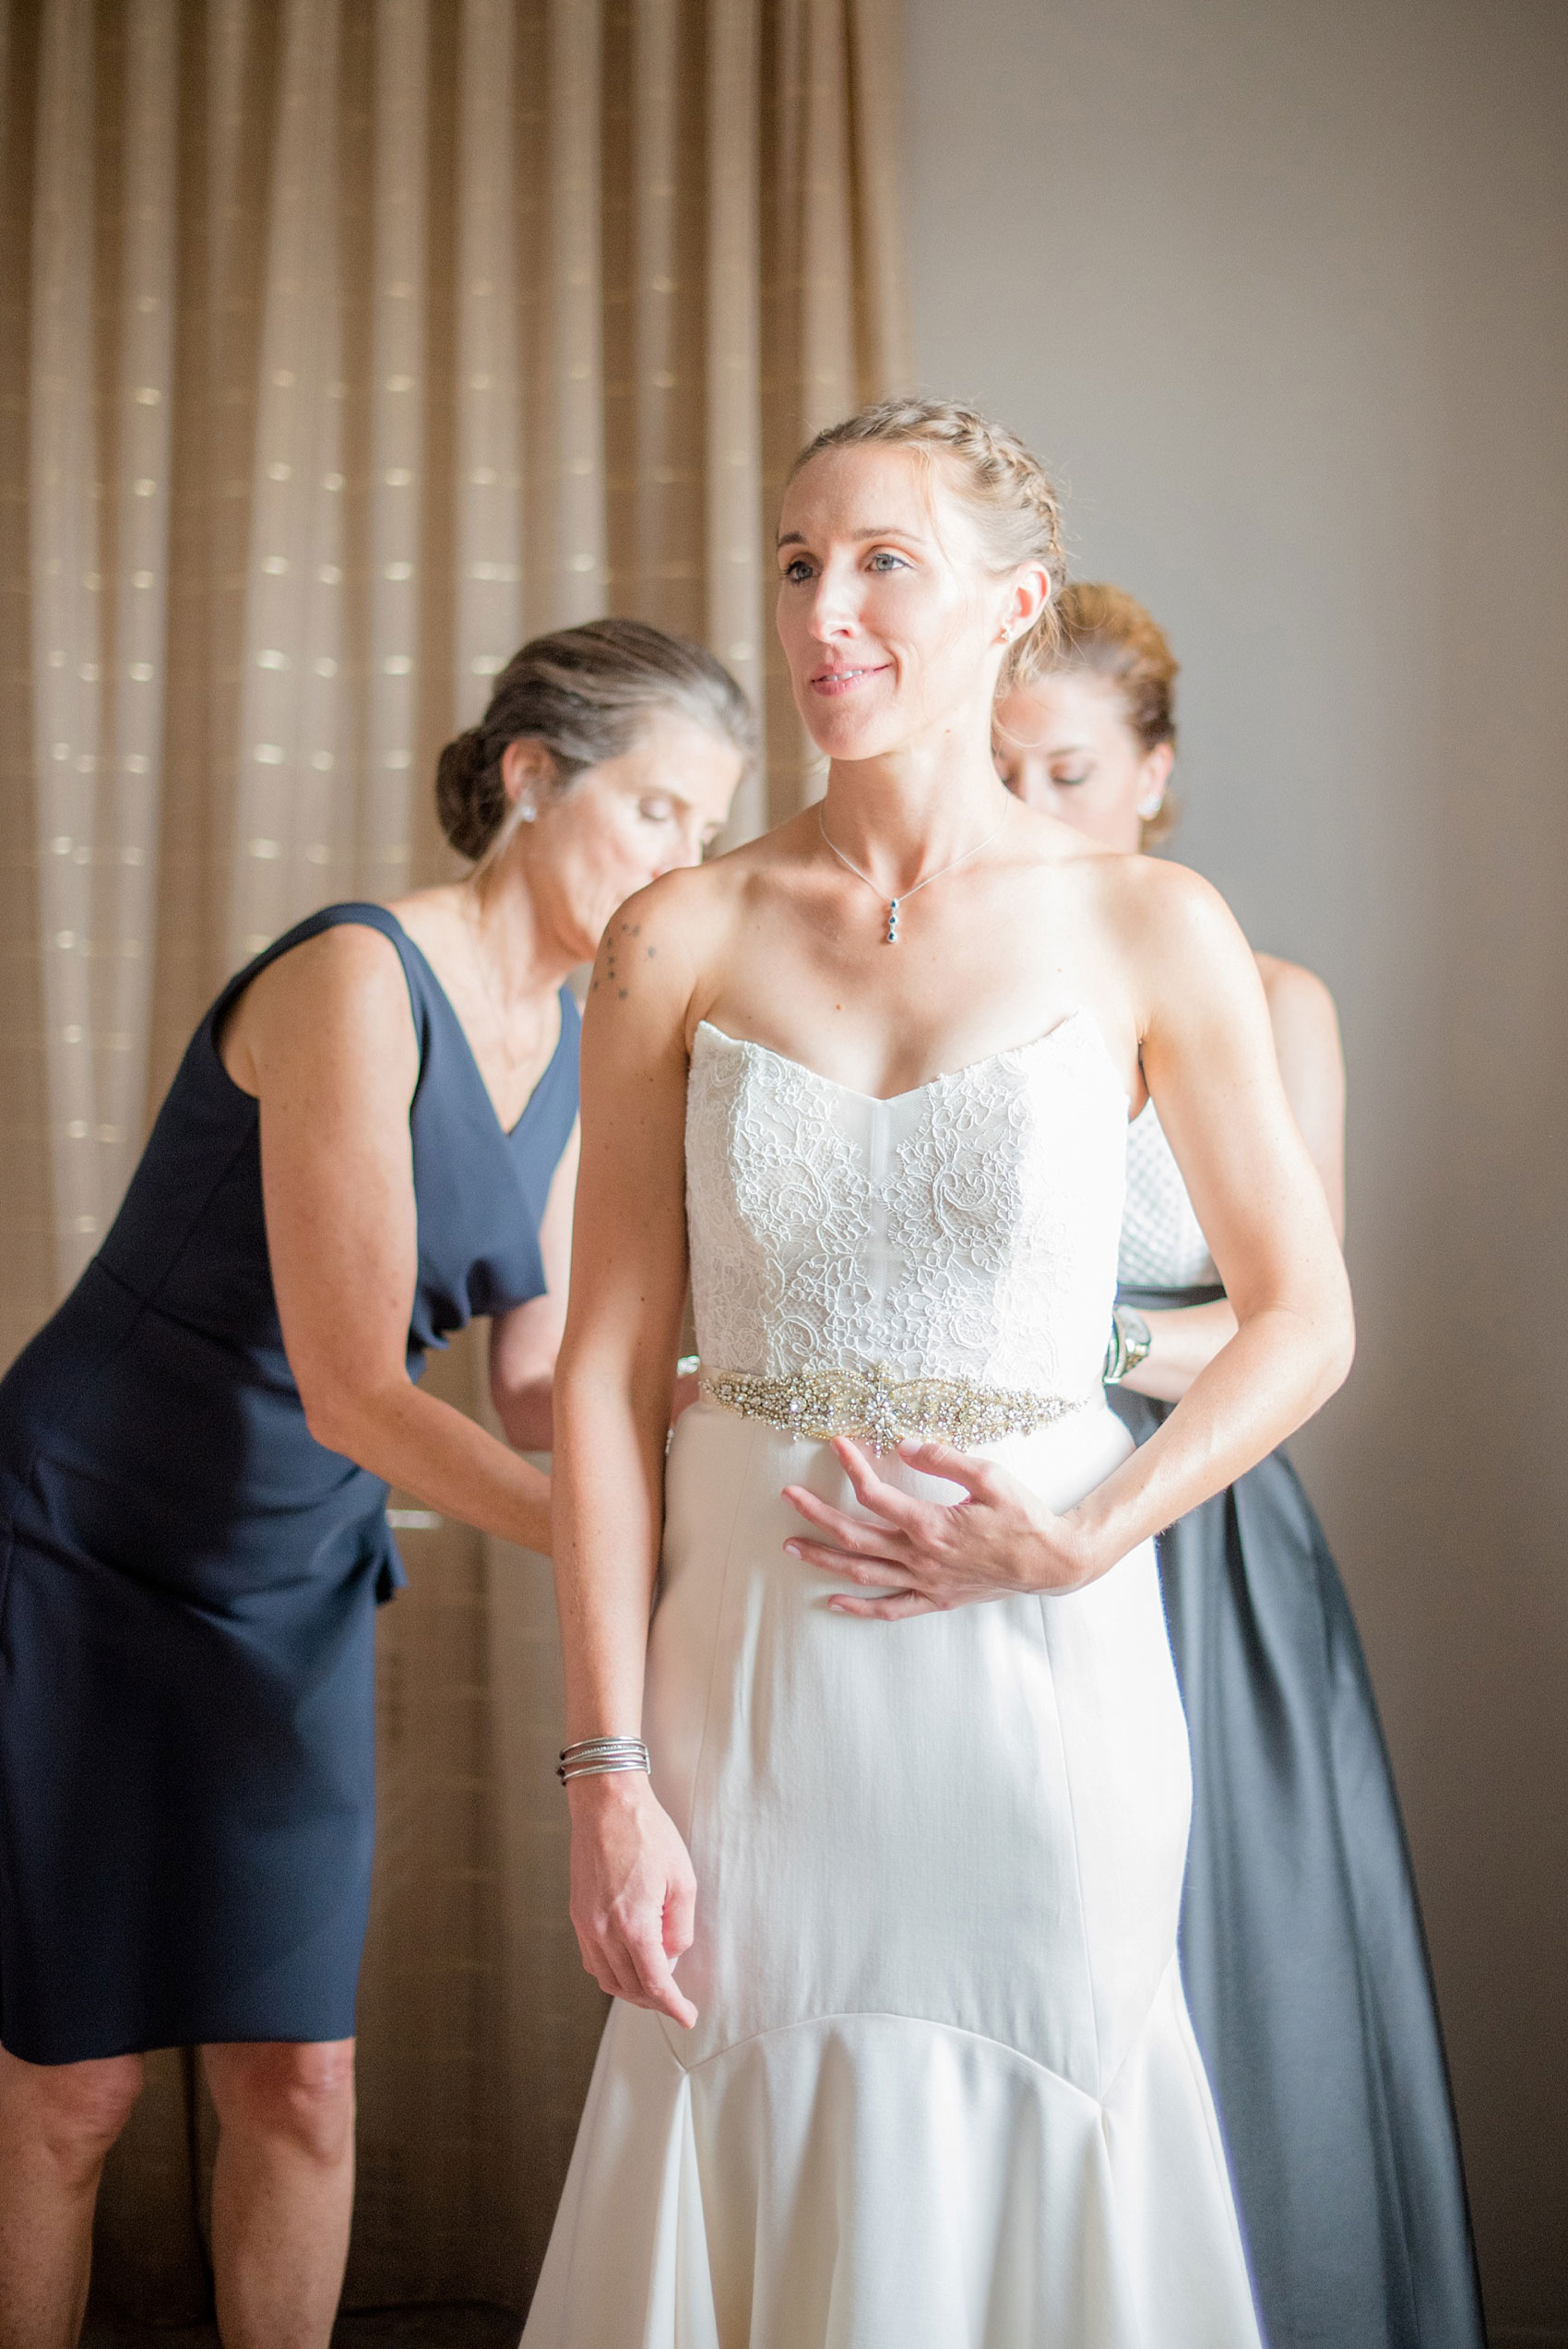 The Cookery Durham wedding photos by Mikkel Paige Photography. Picture of the bride getting ready with her family at 21c Museum Hotel.